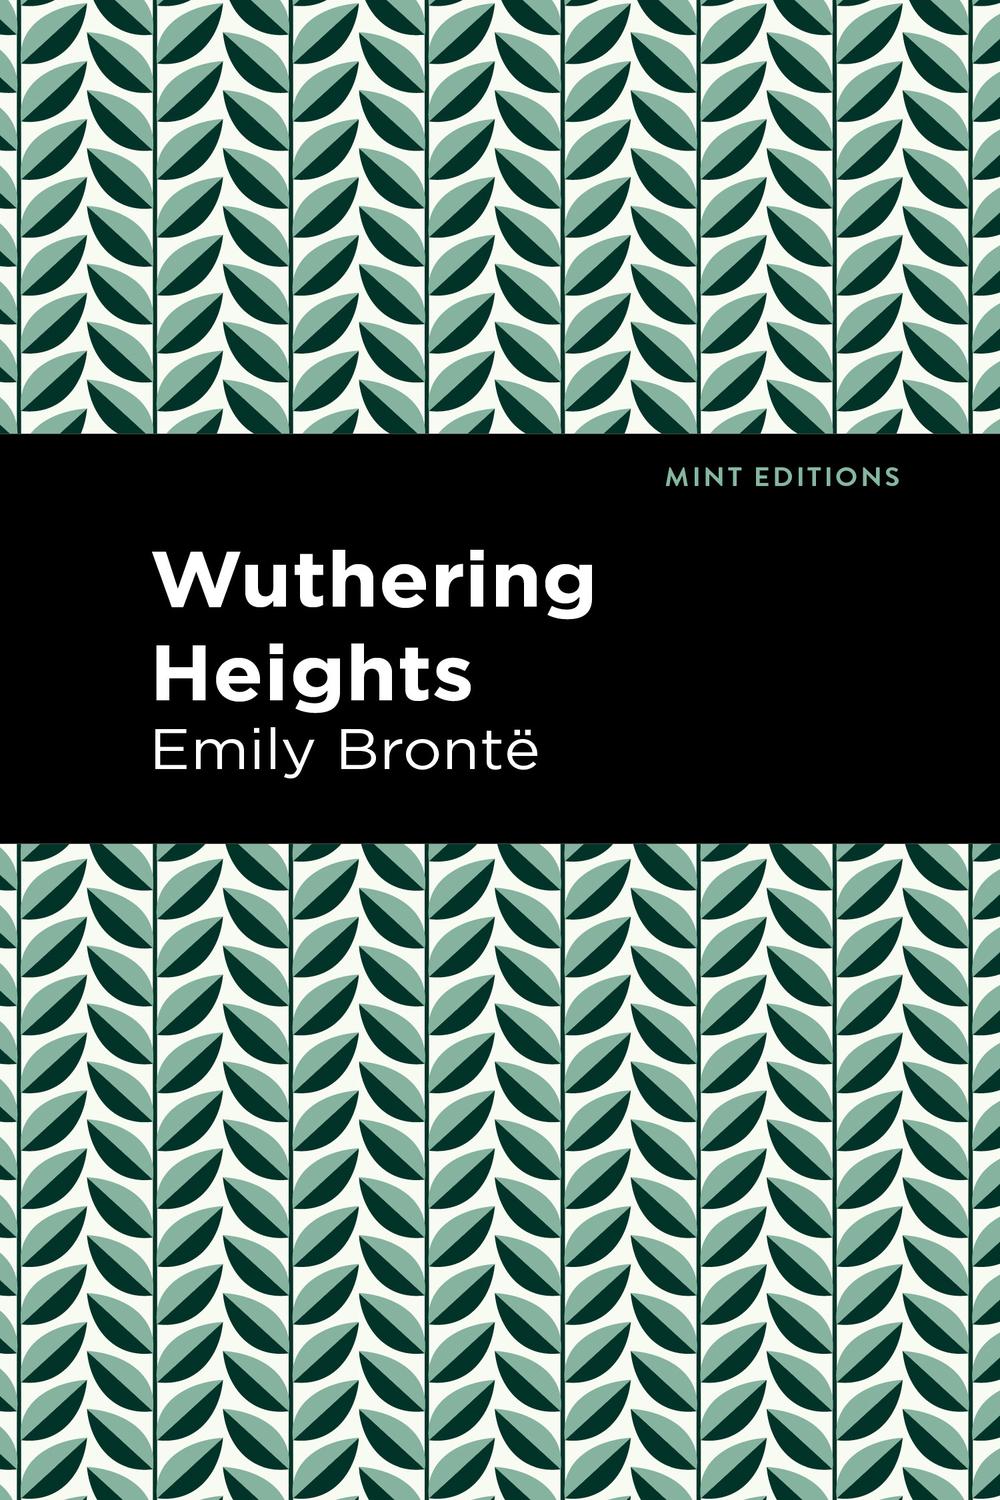 Wuthering Heights - Emily Bront?,,